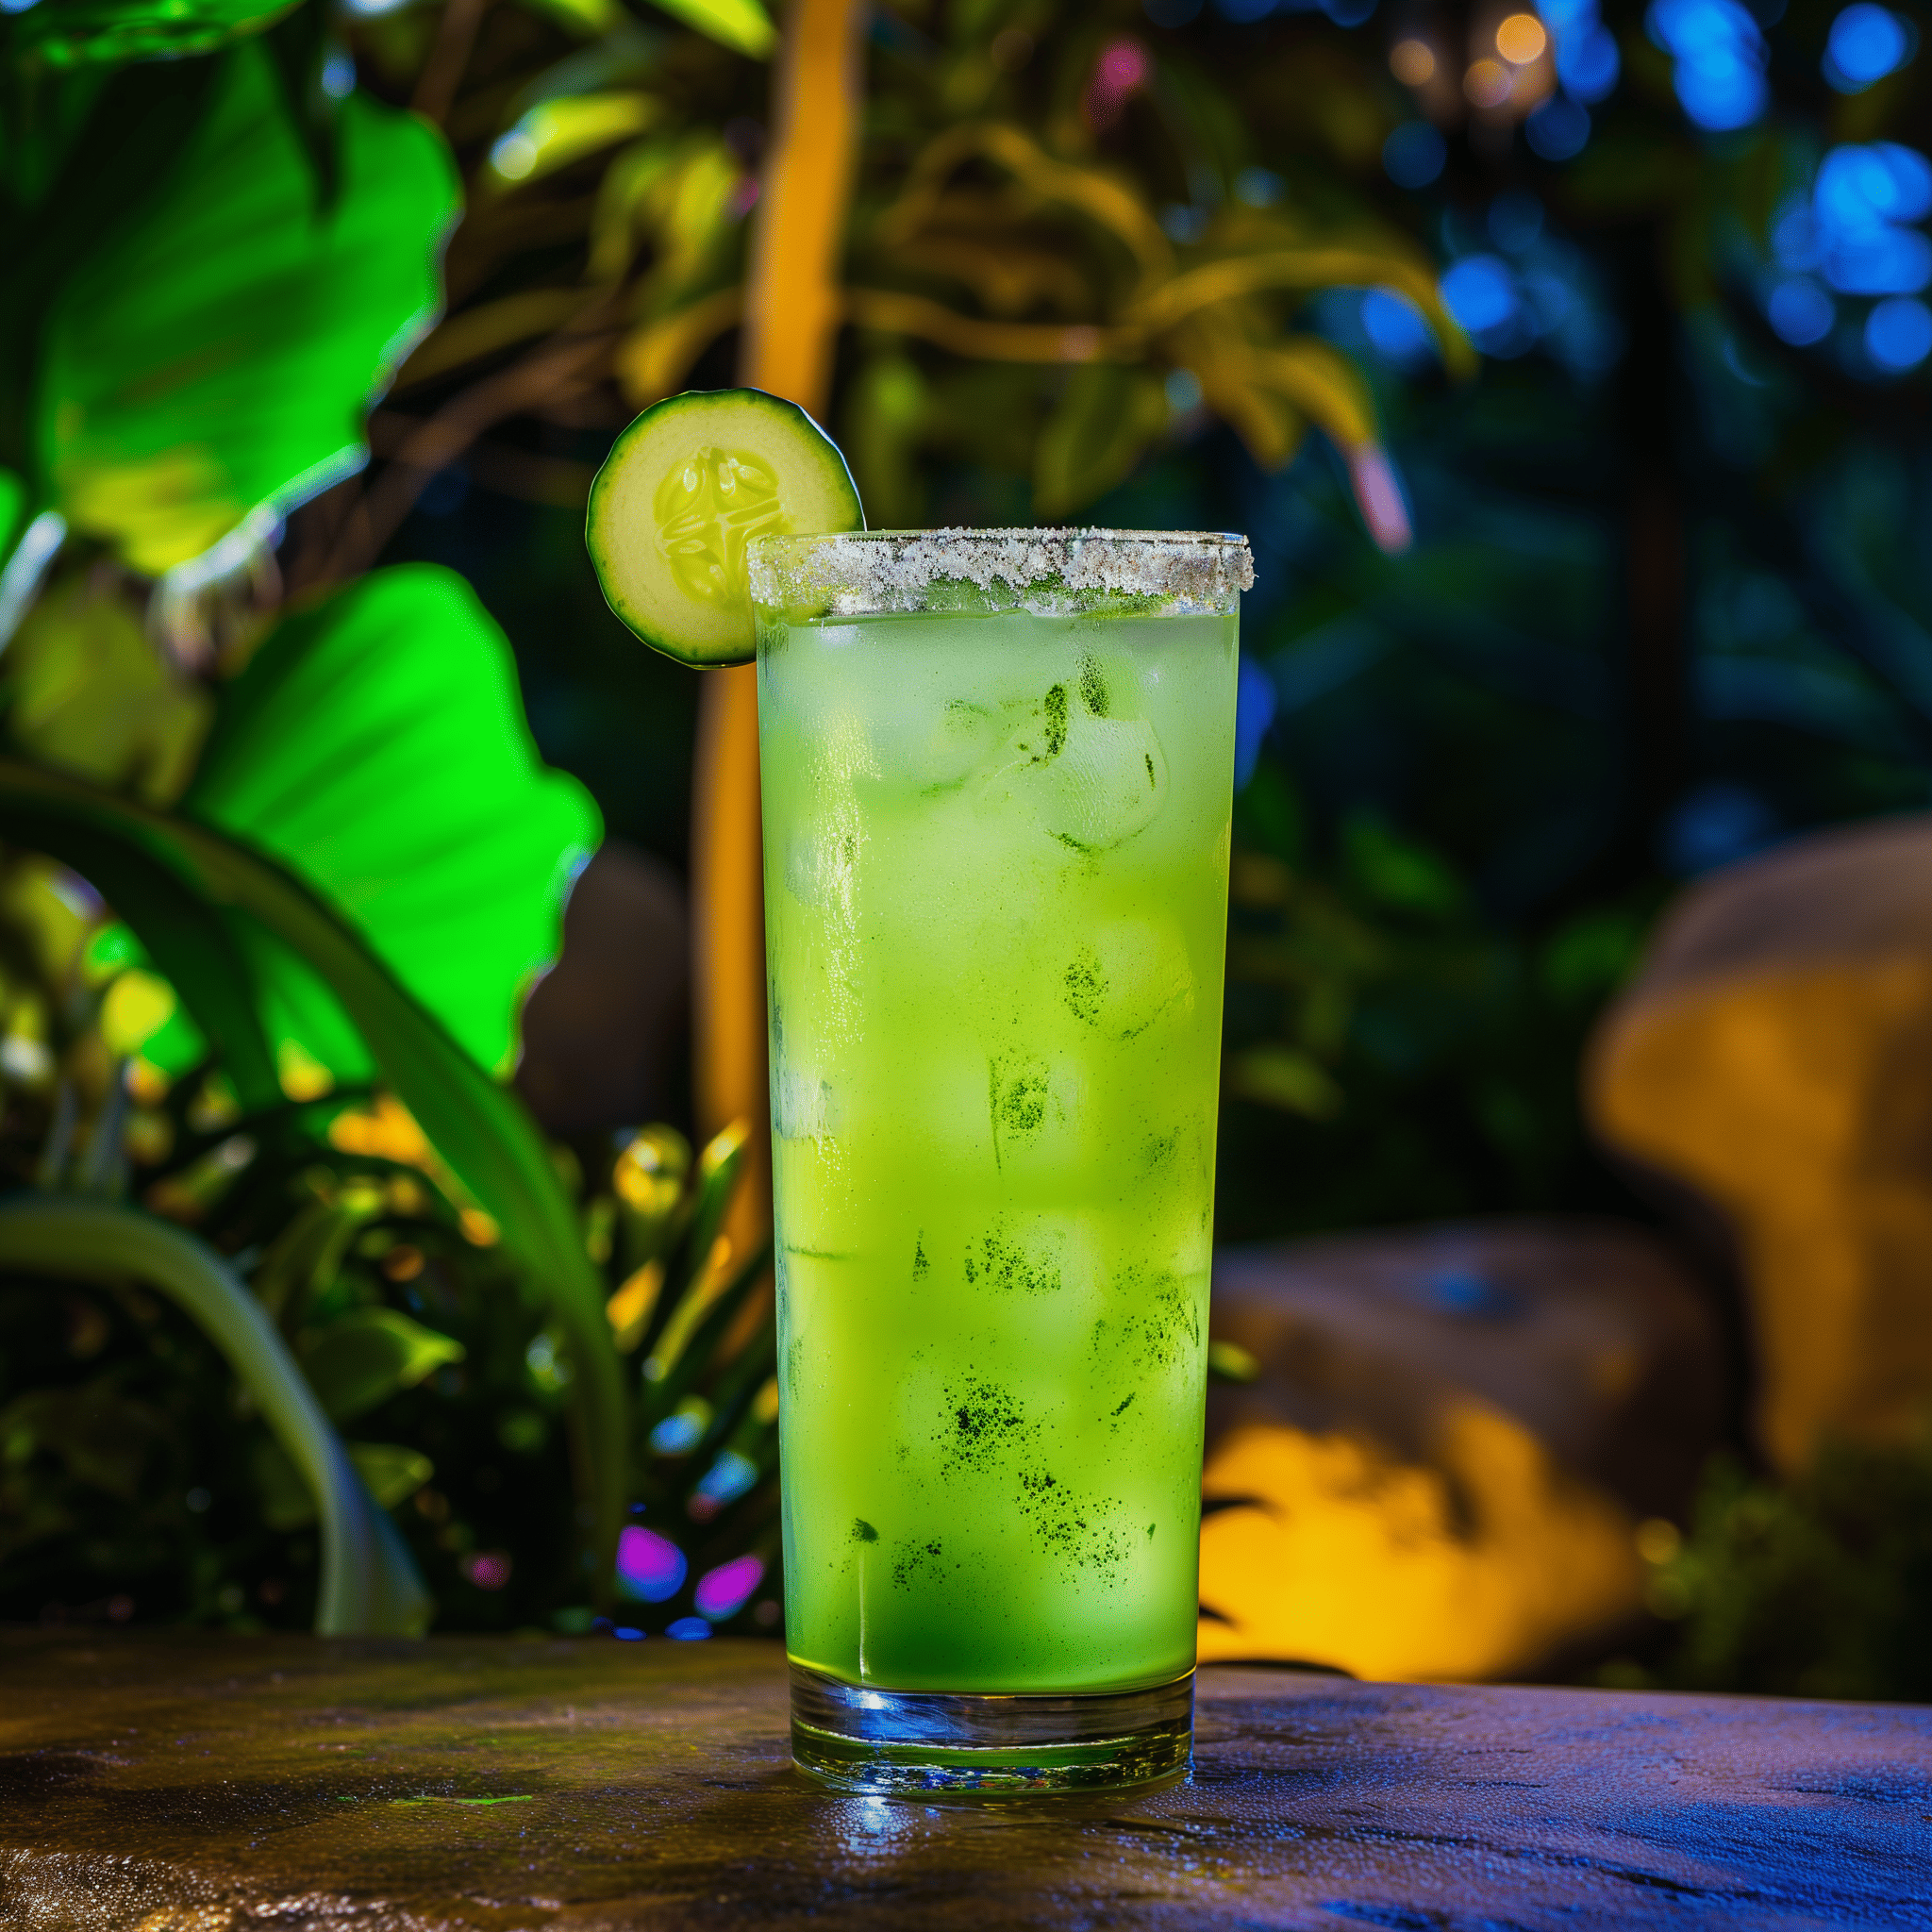 Green Beast Cocktail Recipe - The Green Beast is a symphony of herbal and citrus notes with a delicate sweetness. It's light and refreshing, with a slight anise kick from the absinthe that's balanced by the coolness of cucumber and the tartness of lime.